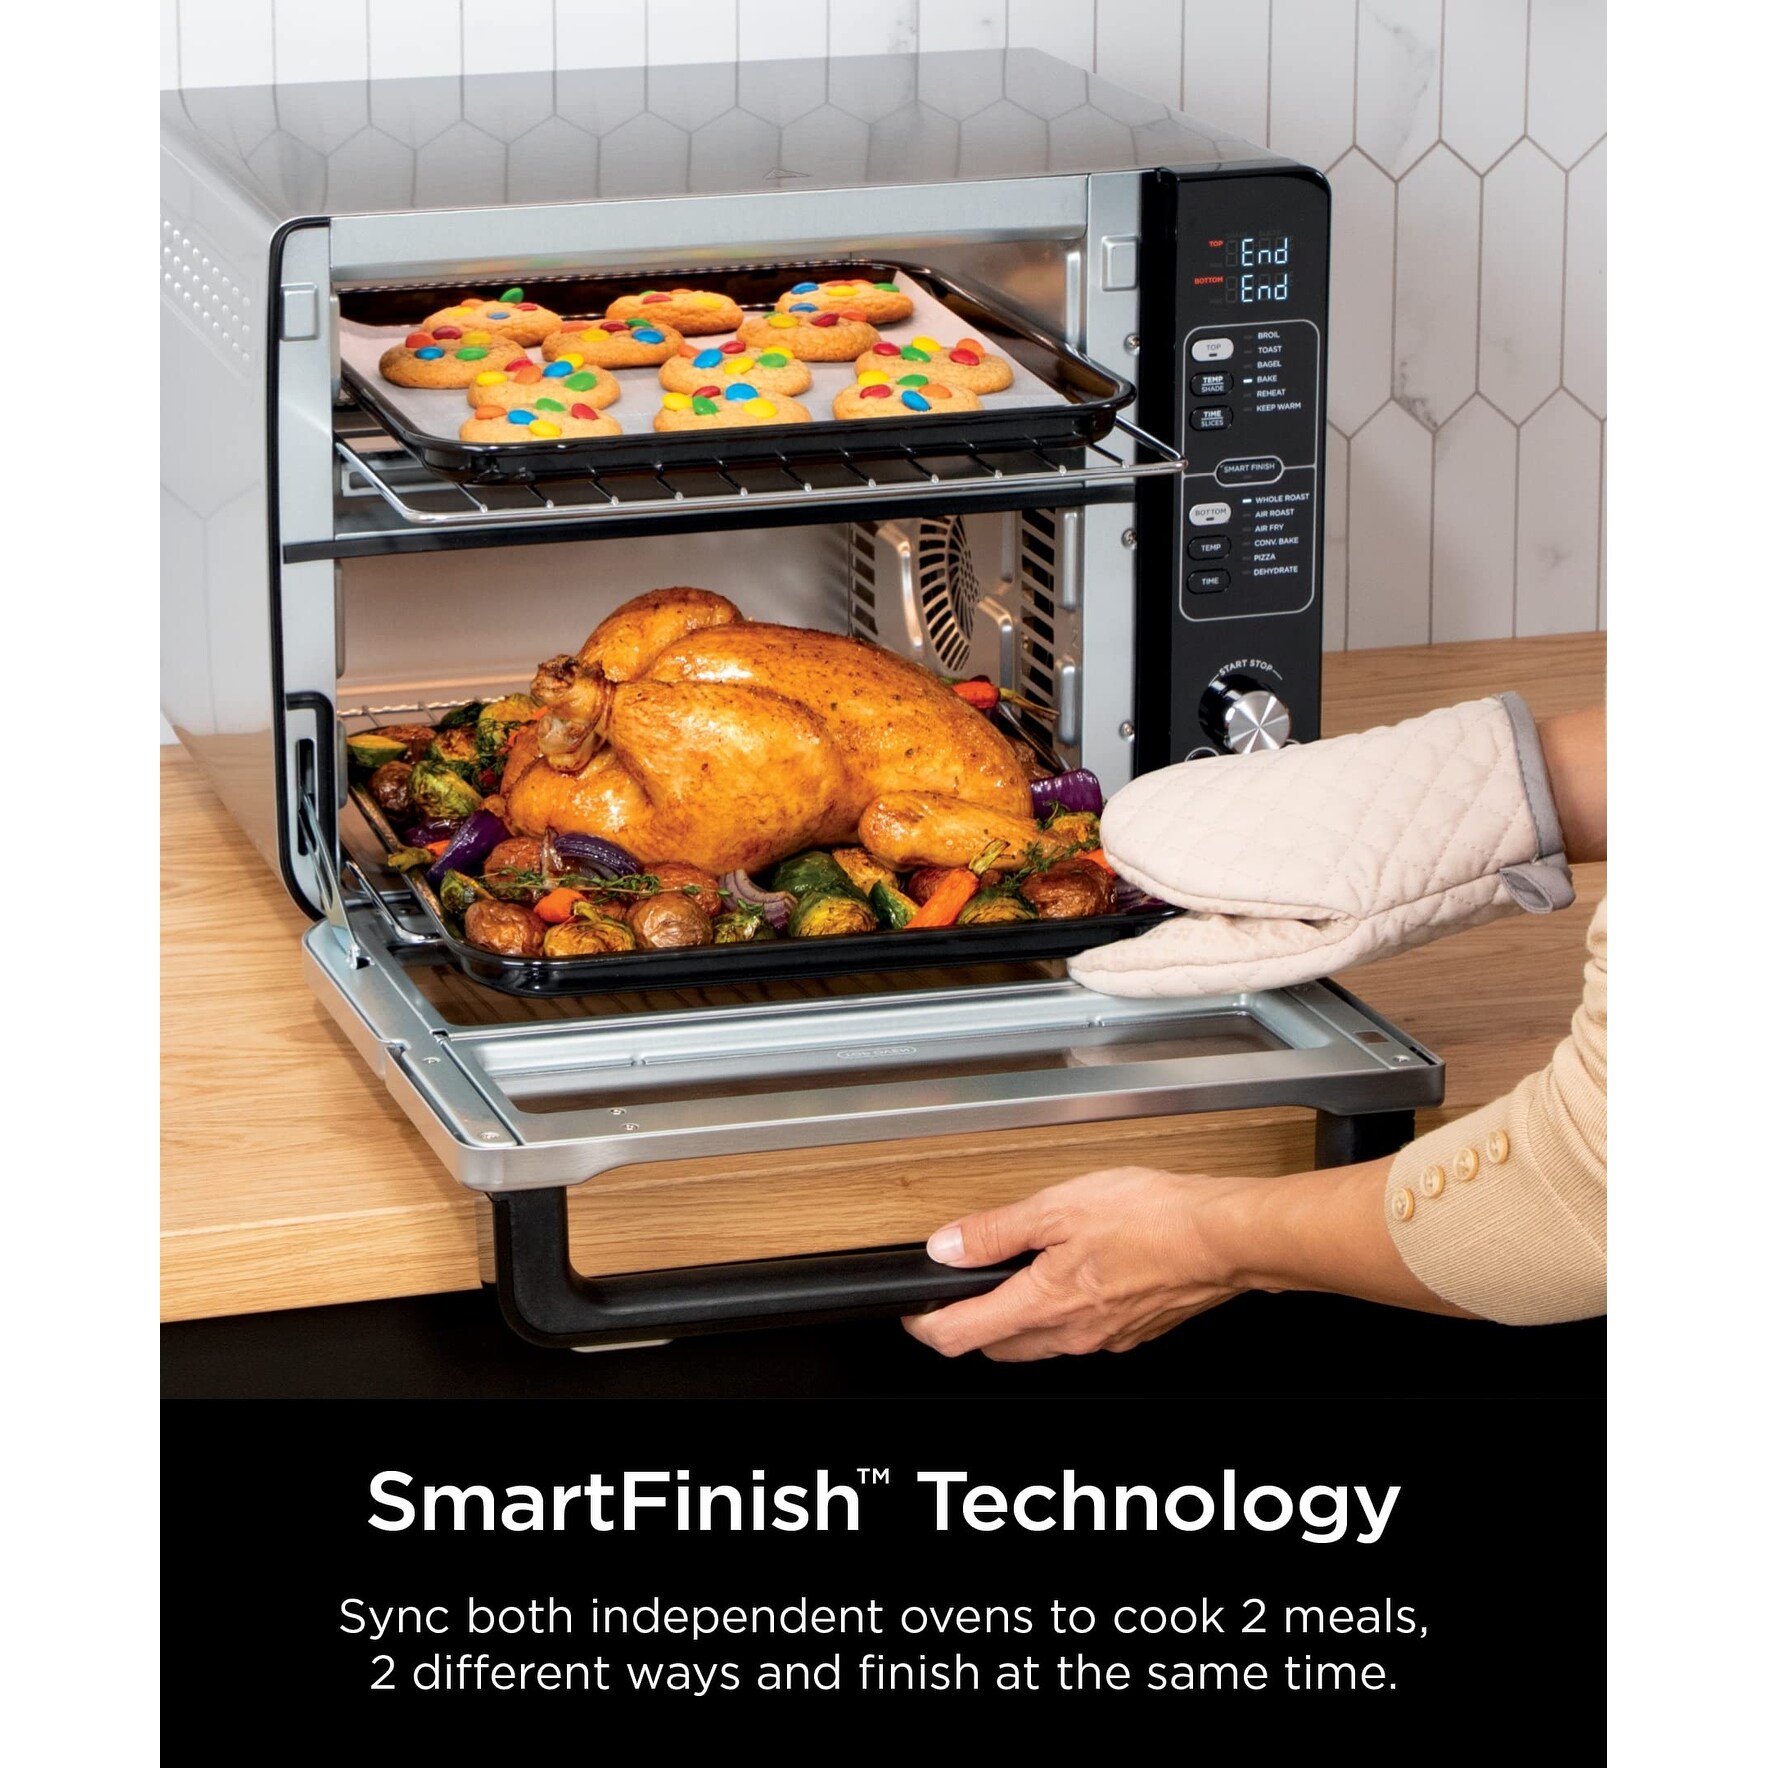 https://ak1.ostkcdn.com/images/products/is/images/direct/83af62e4f8193c6deece433f8e46c021946f5f3a/12-in-1-Smart-Double-Oven-with-FlexDoor%2C-Thermometer%2C-FlavorSeal%2C-Smart-Finish%2C-Rapid-Top-Convection-and-Air-Fry-Bottom.jpg